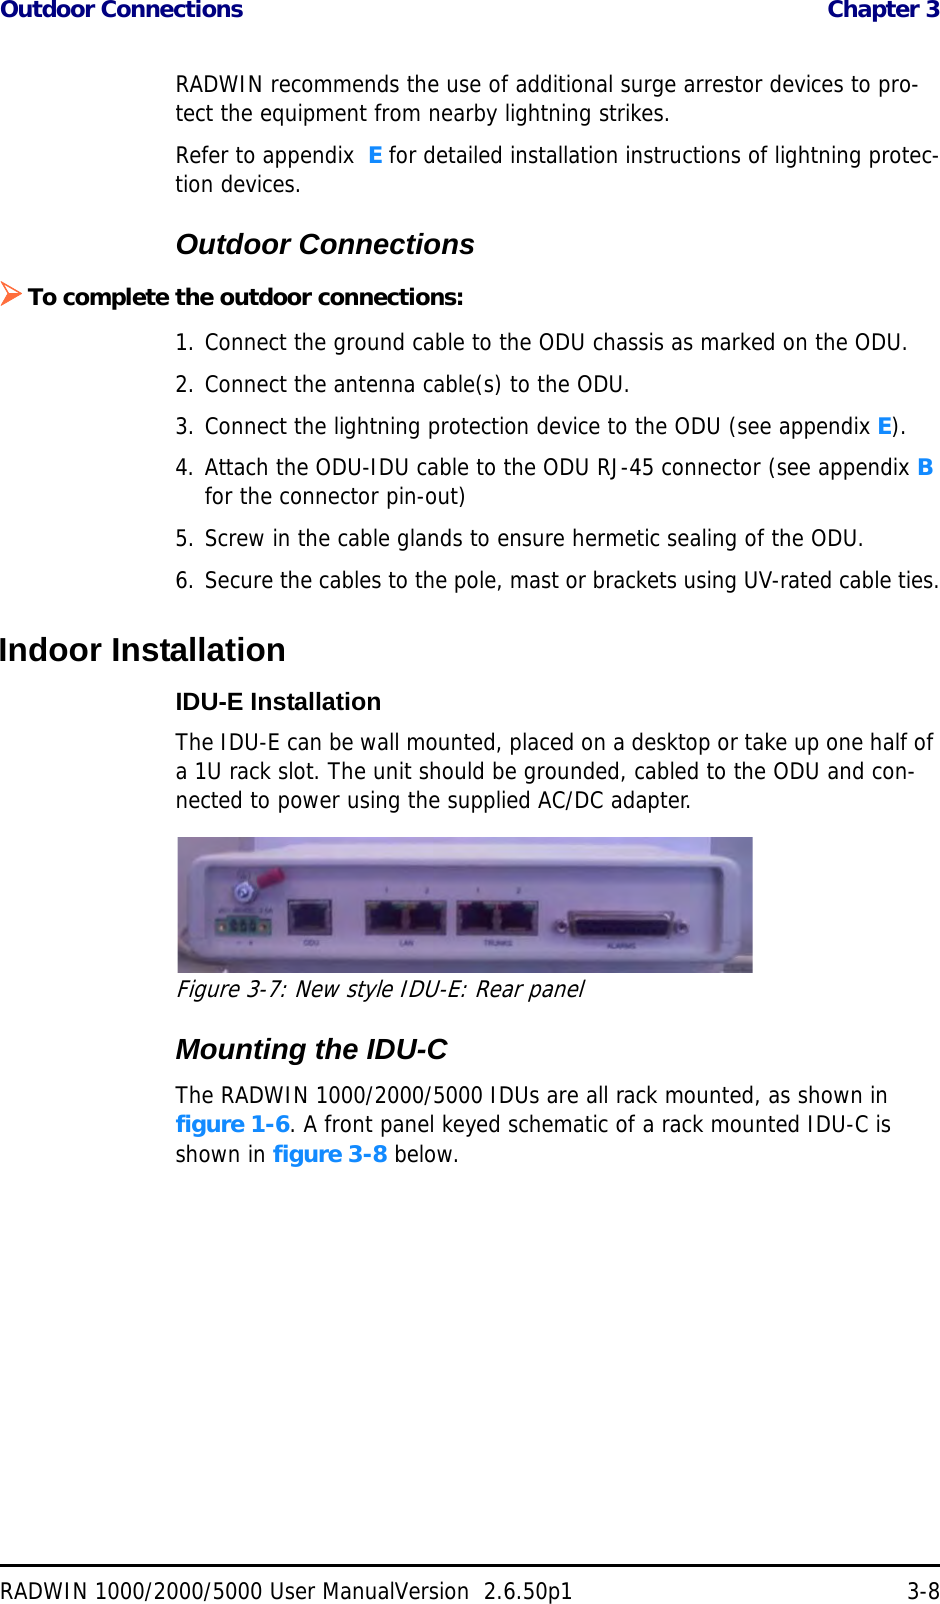 Outdoor Connections  Chapter 3RADWIN 1000/2000/5000 User ManualVersion  2.6.50p1 3-8RADWIN recommends the use of additional surge arrestor devices to pro-tect the equipment from nearby lightning strikes.Refer to appendix  E for detailed installation instructions of lightning protec-tion devices.Outdoor ConnectionsTo complete the outdoor connections:1. Connect the ground cable to the ODU chassis as marked on the ODU.2. Connect the antenna cable(s) to the ODU.3. Connect the lightning protection device to the ODU (see appendix E).4. Attach the ODU-IDU cable to the ODU RJ-45 connector (see appendix B for the connector pin-out)5. Screw in the cable glands to ensure hermetic sealing of the ODU.6. Secure the cables to the pole, mast or brackets using UV-rated cable ties.Indoor InstallationIDU-E InstallationThe IDU-E can be wall mounted, placed on a desktop or take up one half of a 1U rack slot. The unit should be grounded, cabled to the ODU and con-nected to power using the supplied AC/DC adapter.Figure 3-7: New style IDU-E: Rear panelMounting the IDU-CThe RADWIN 1000/2000/5000 IDUs are all rack mounted, as shown in figure 1-6. A front panel keyed schematic of a rack mounted IDU-C is shown in figure 3-8 below.